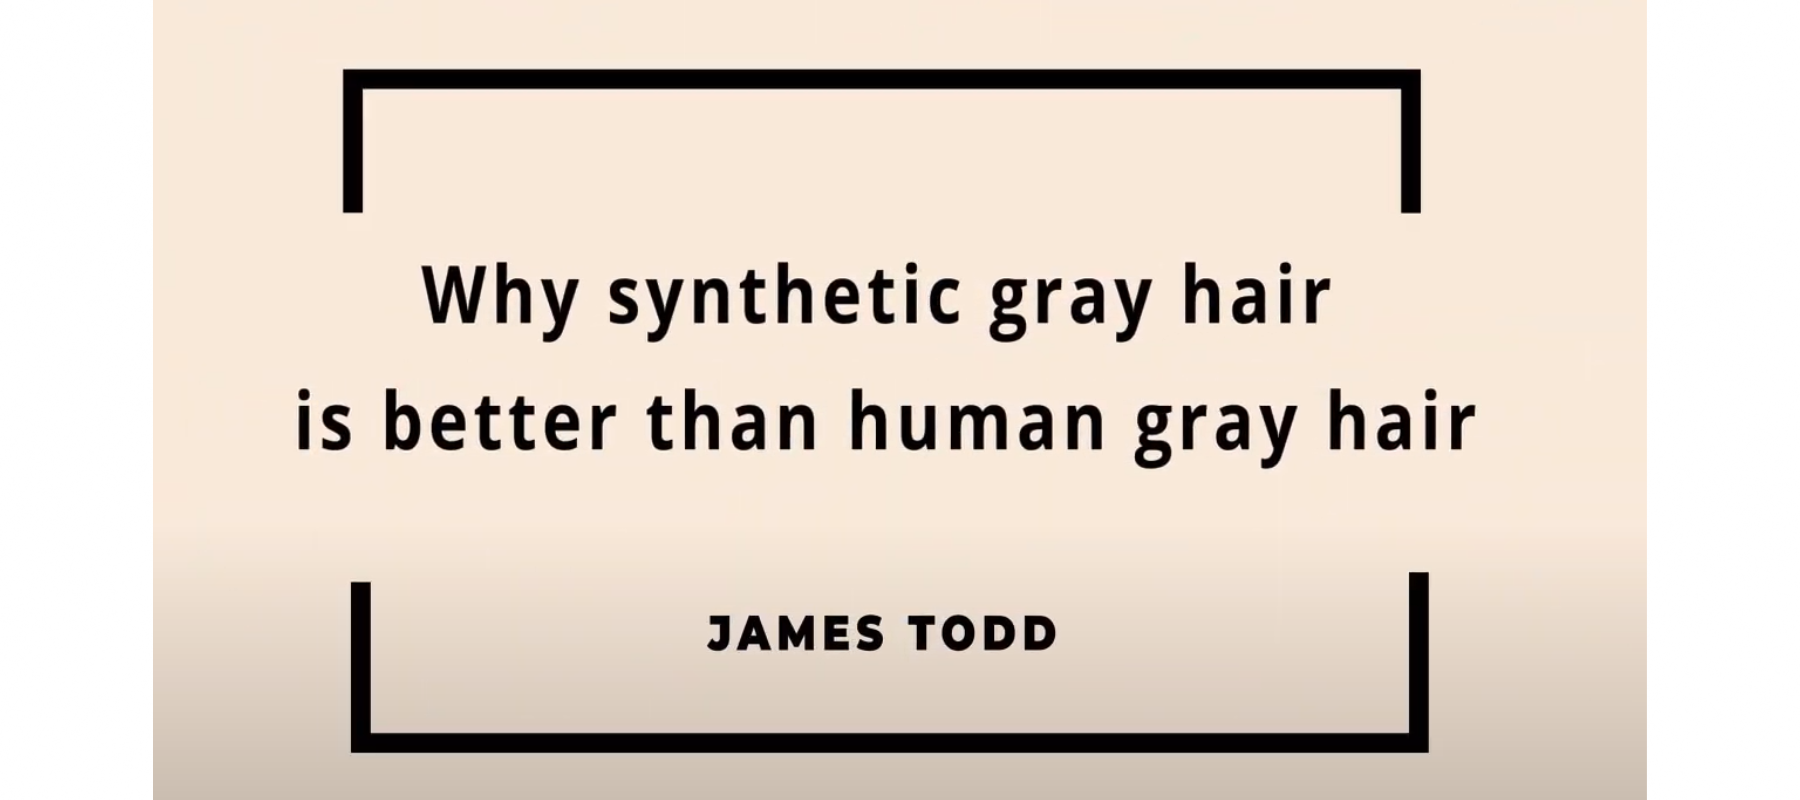 Reasons why synthetic gray hair is better than human gray hair for wigs and hair toppers